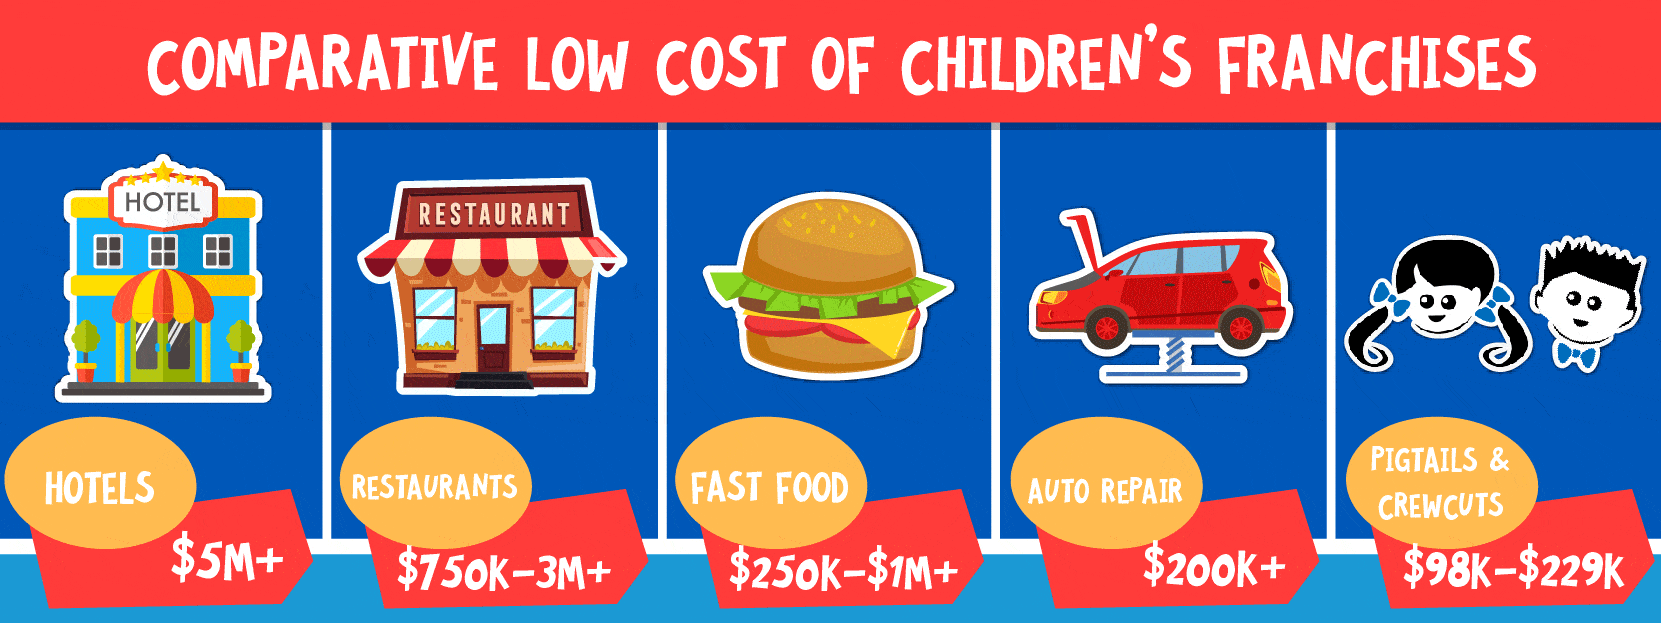 comparative cost of franchises part of children's franchise industry infographic